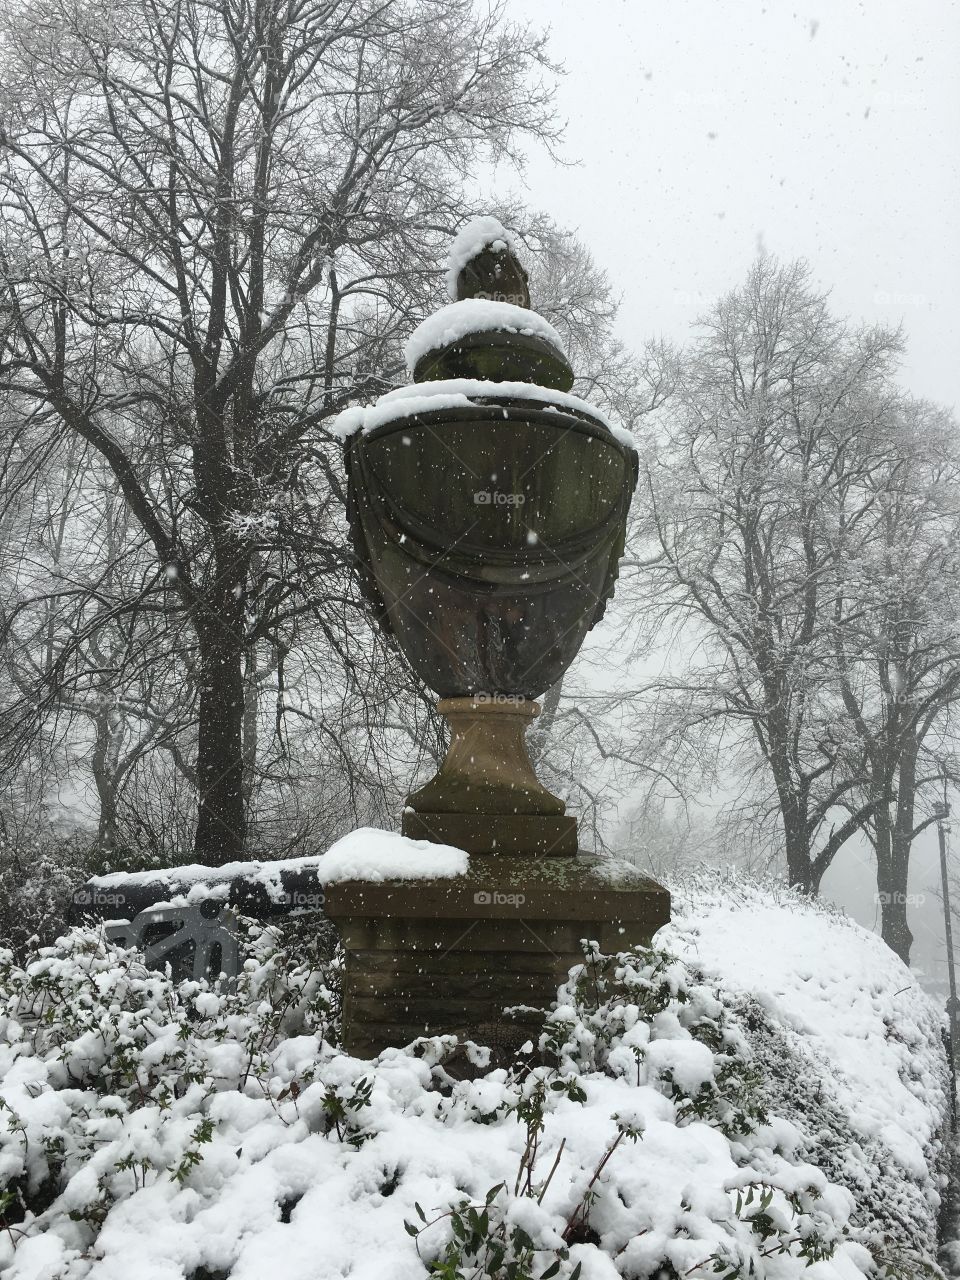 Lamp at Vernon park in Stockport